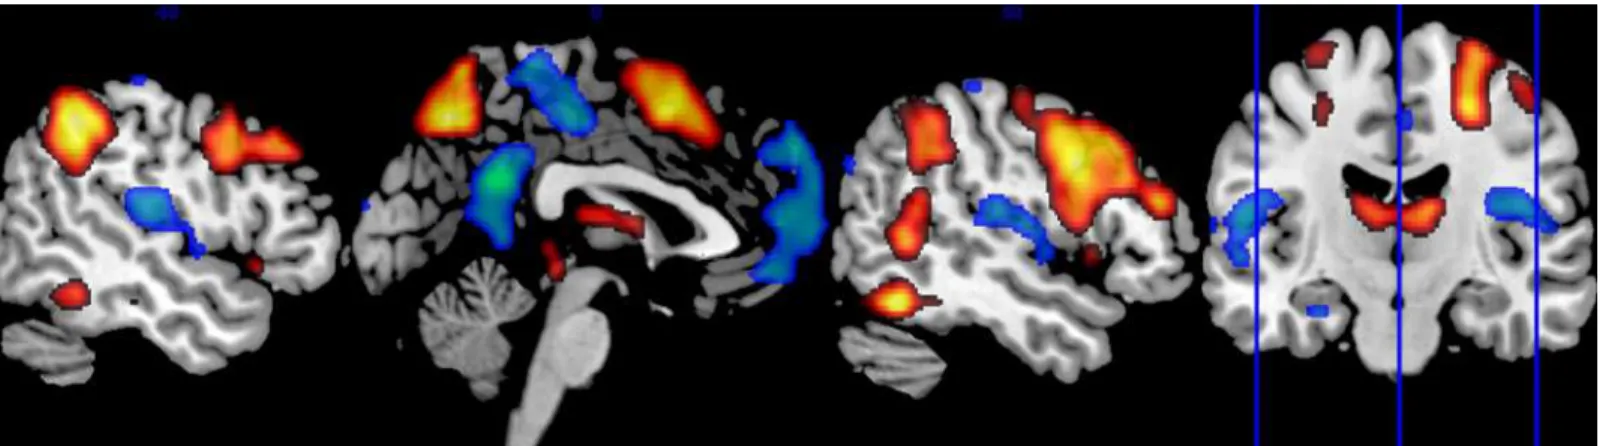 Fig 1. Positive and negative BOLD responses during executive processing. The sagittal brain images show whole brain group activation during the working memory task